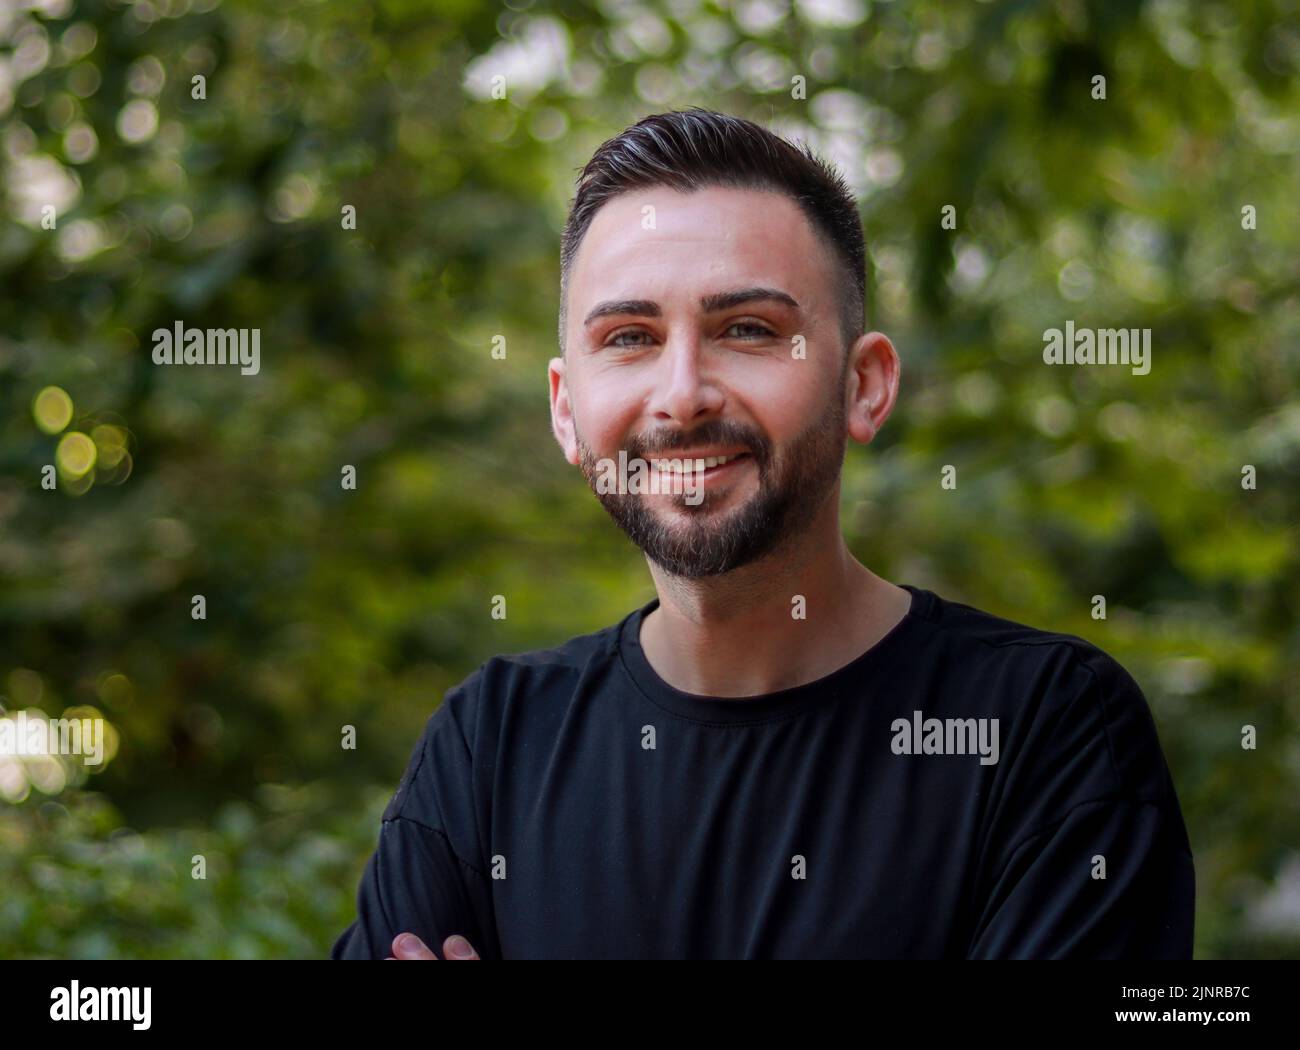 Portrait of young handsome man with beard. Young man in black shirt smiling looking at camera. Outdoor nature background Stock Photo